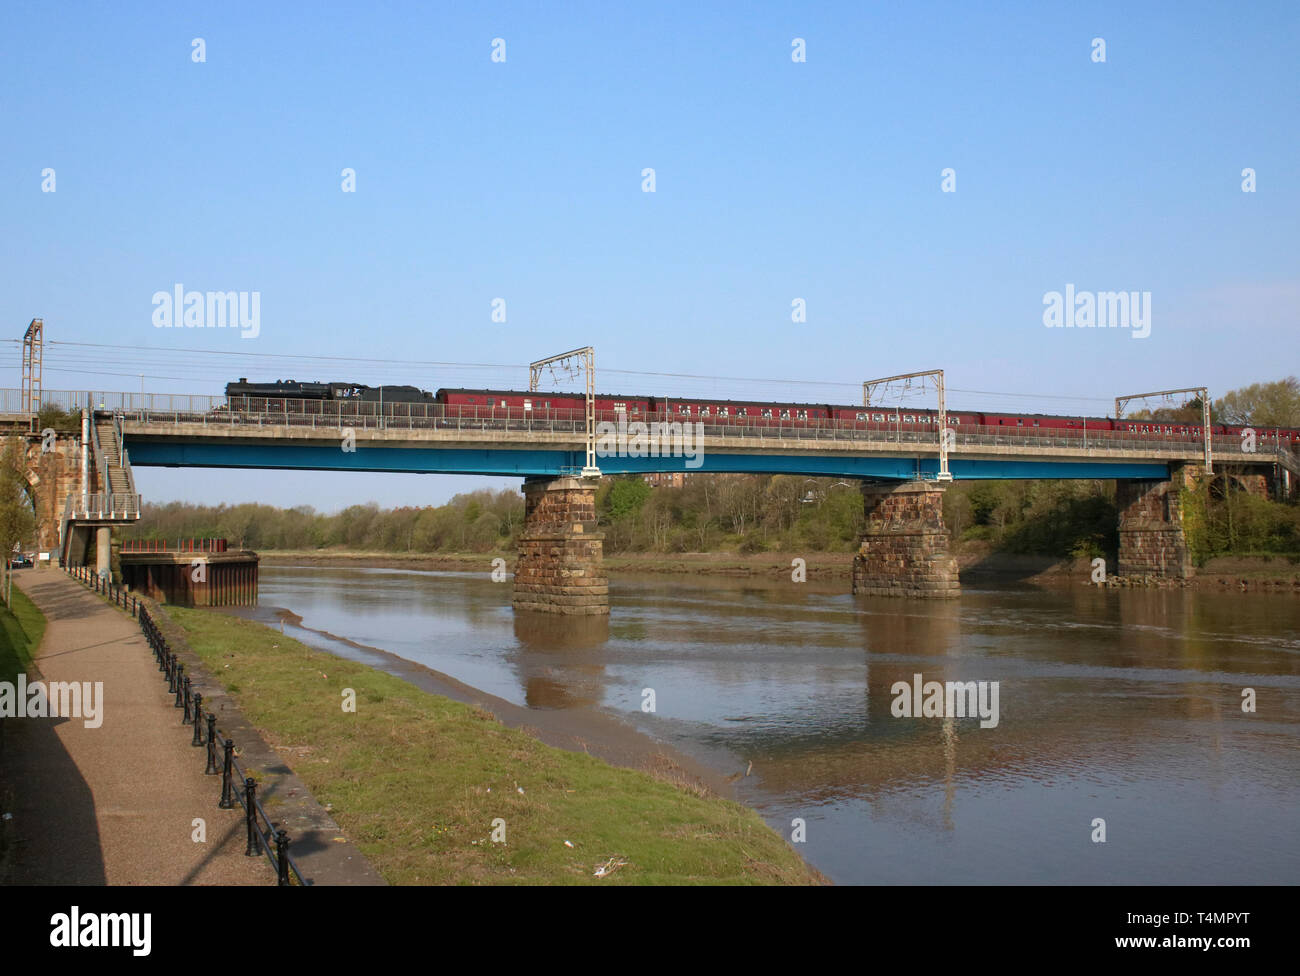 The Salopian Express steam hauled special train on West Coast Main Line, crossing Carlisle Bridge over the River Lune at Lancaster on 17th April 2019. Stock Photo